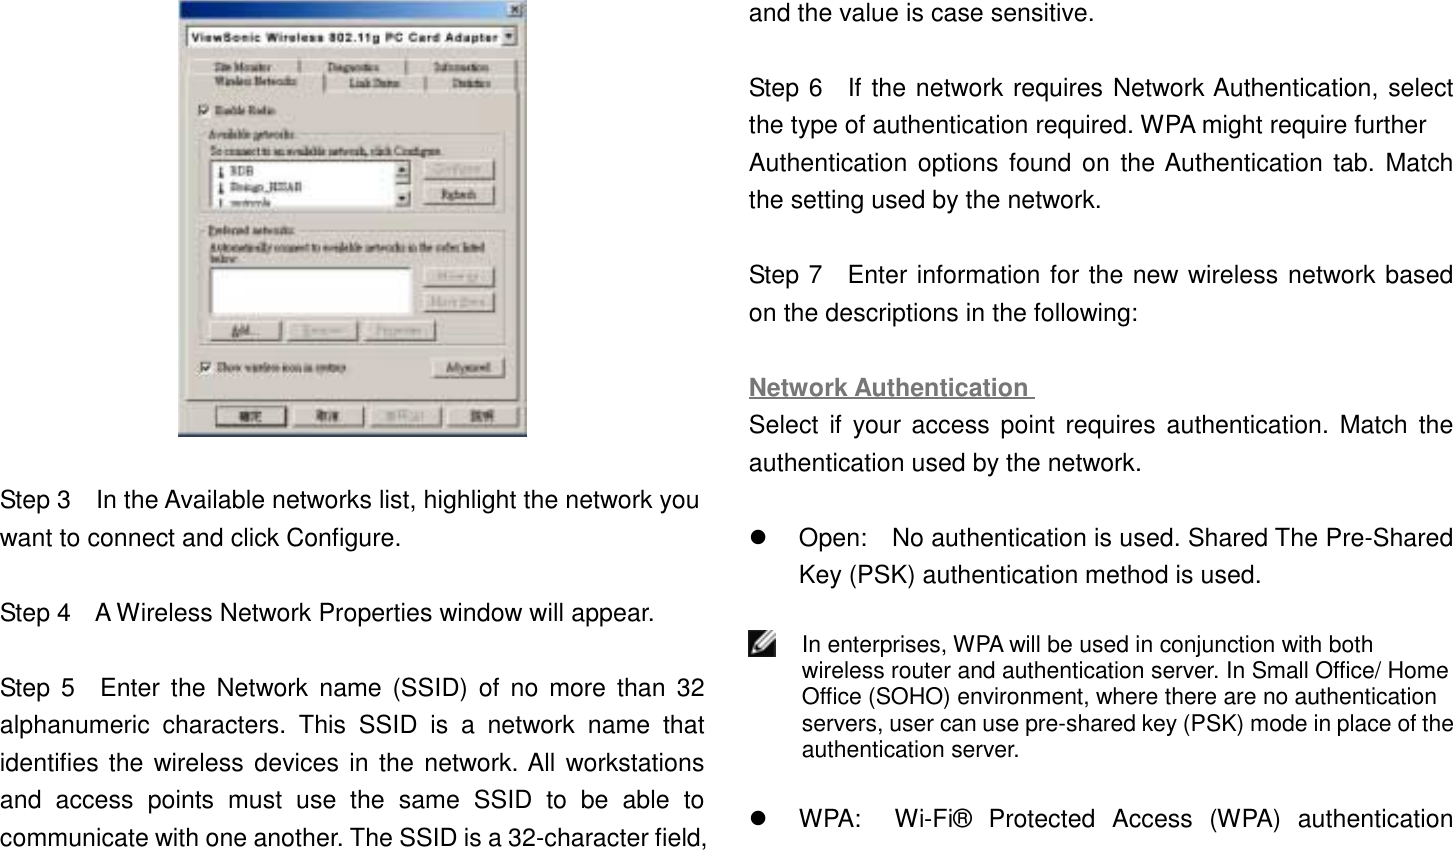 Step 3    In the Available networks list, highlight the network youwant to connect and click Configure.Step 4    A Wireless Network Properties window will appear.Step 5  Enter the Network name (SSID) of no more than 32alphanumeric characters. This SSID is a network name thatidentifies the wireless devices in the network. All workstationsand access points must use the same SSID to be able tocommunicate with one another. The SSID is a 32-character field,and the value is case sensitive.Step 6  If the network requires Network Authentication, selectthe type of authentication required. WPA might require furtherAuthentication options found on the Authentication tab. Matchthe setting used by the network.Step 7  Enter information for the new wireless network basedon the descriptions in the following:Network AuthenticationSelect if your access point requires authentication. Match theauthentication used by the network.!  Open:    No authentication is used. Shared The Pre-SharedKey (PSK) authentication method is used.In enterprises, WPA will be used in conjunction with bothwireless router and authentication server. In Small Office/ HomeOffice (SOHO) environment, where there are no authenticationservers, user can use pre-shared key (PSK) mode in place of theauthentication server.!  WPA:  Wi-Fi® Protected Access (WPA) authentication